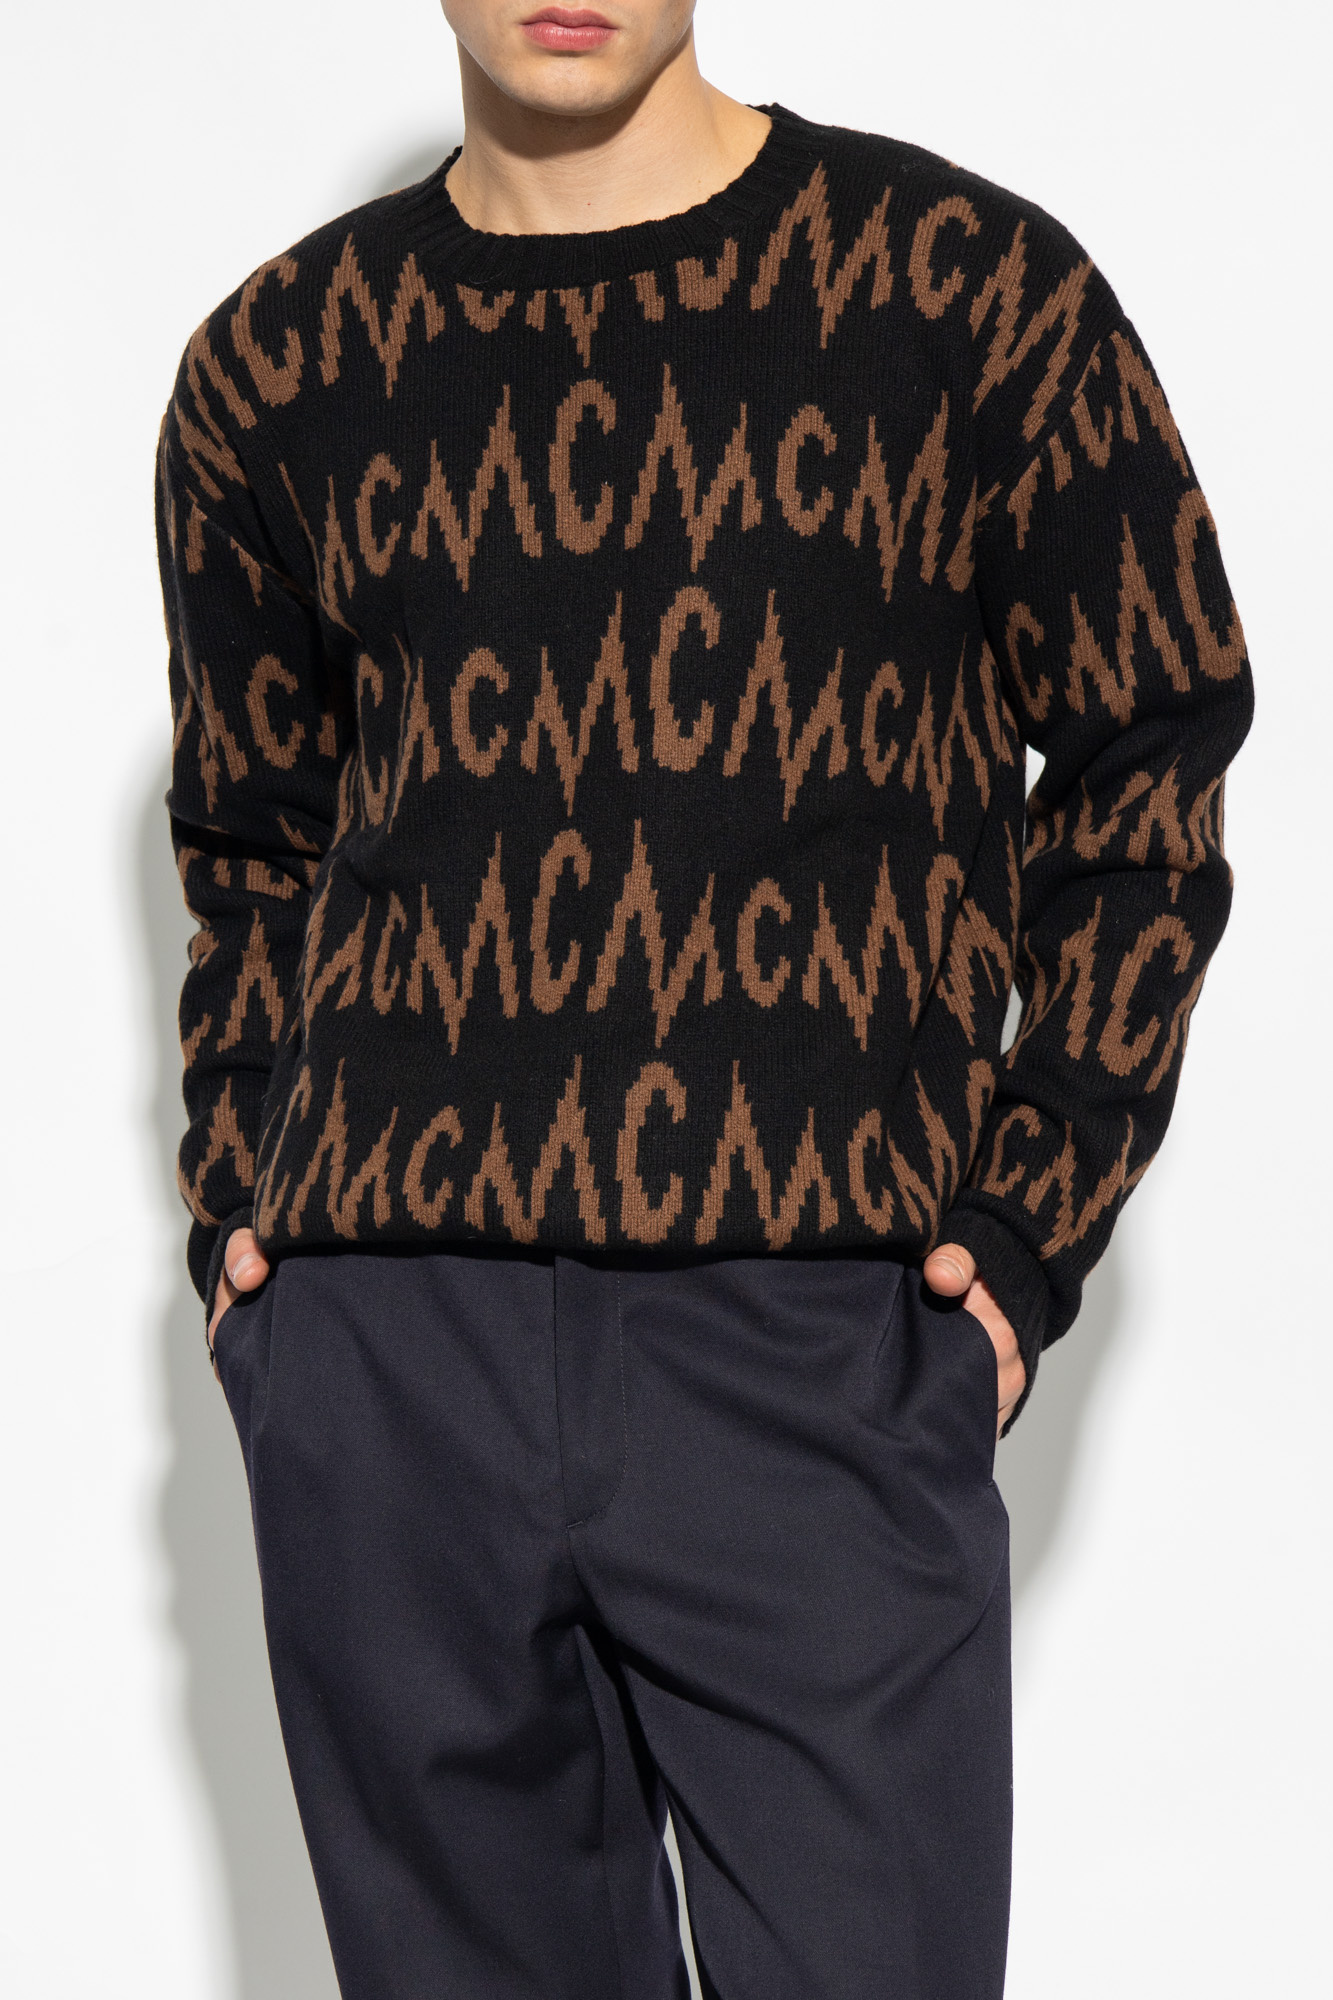 Women's Long-sleeved Top With Logo Pattern by Mcm